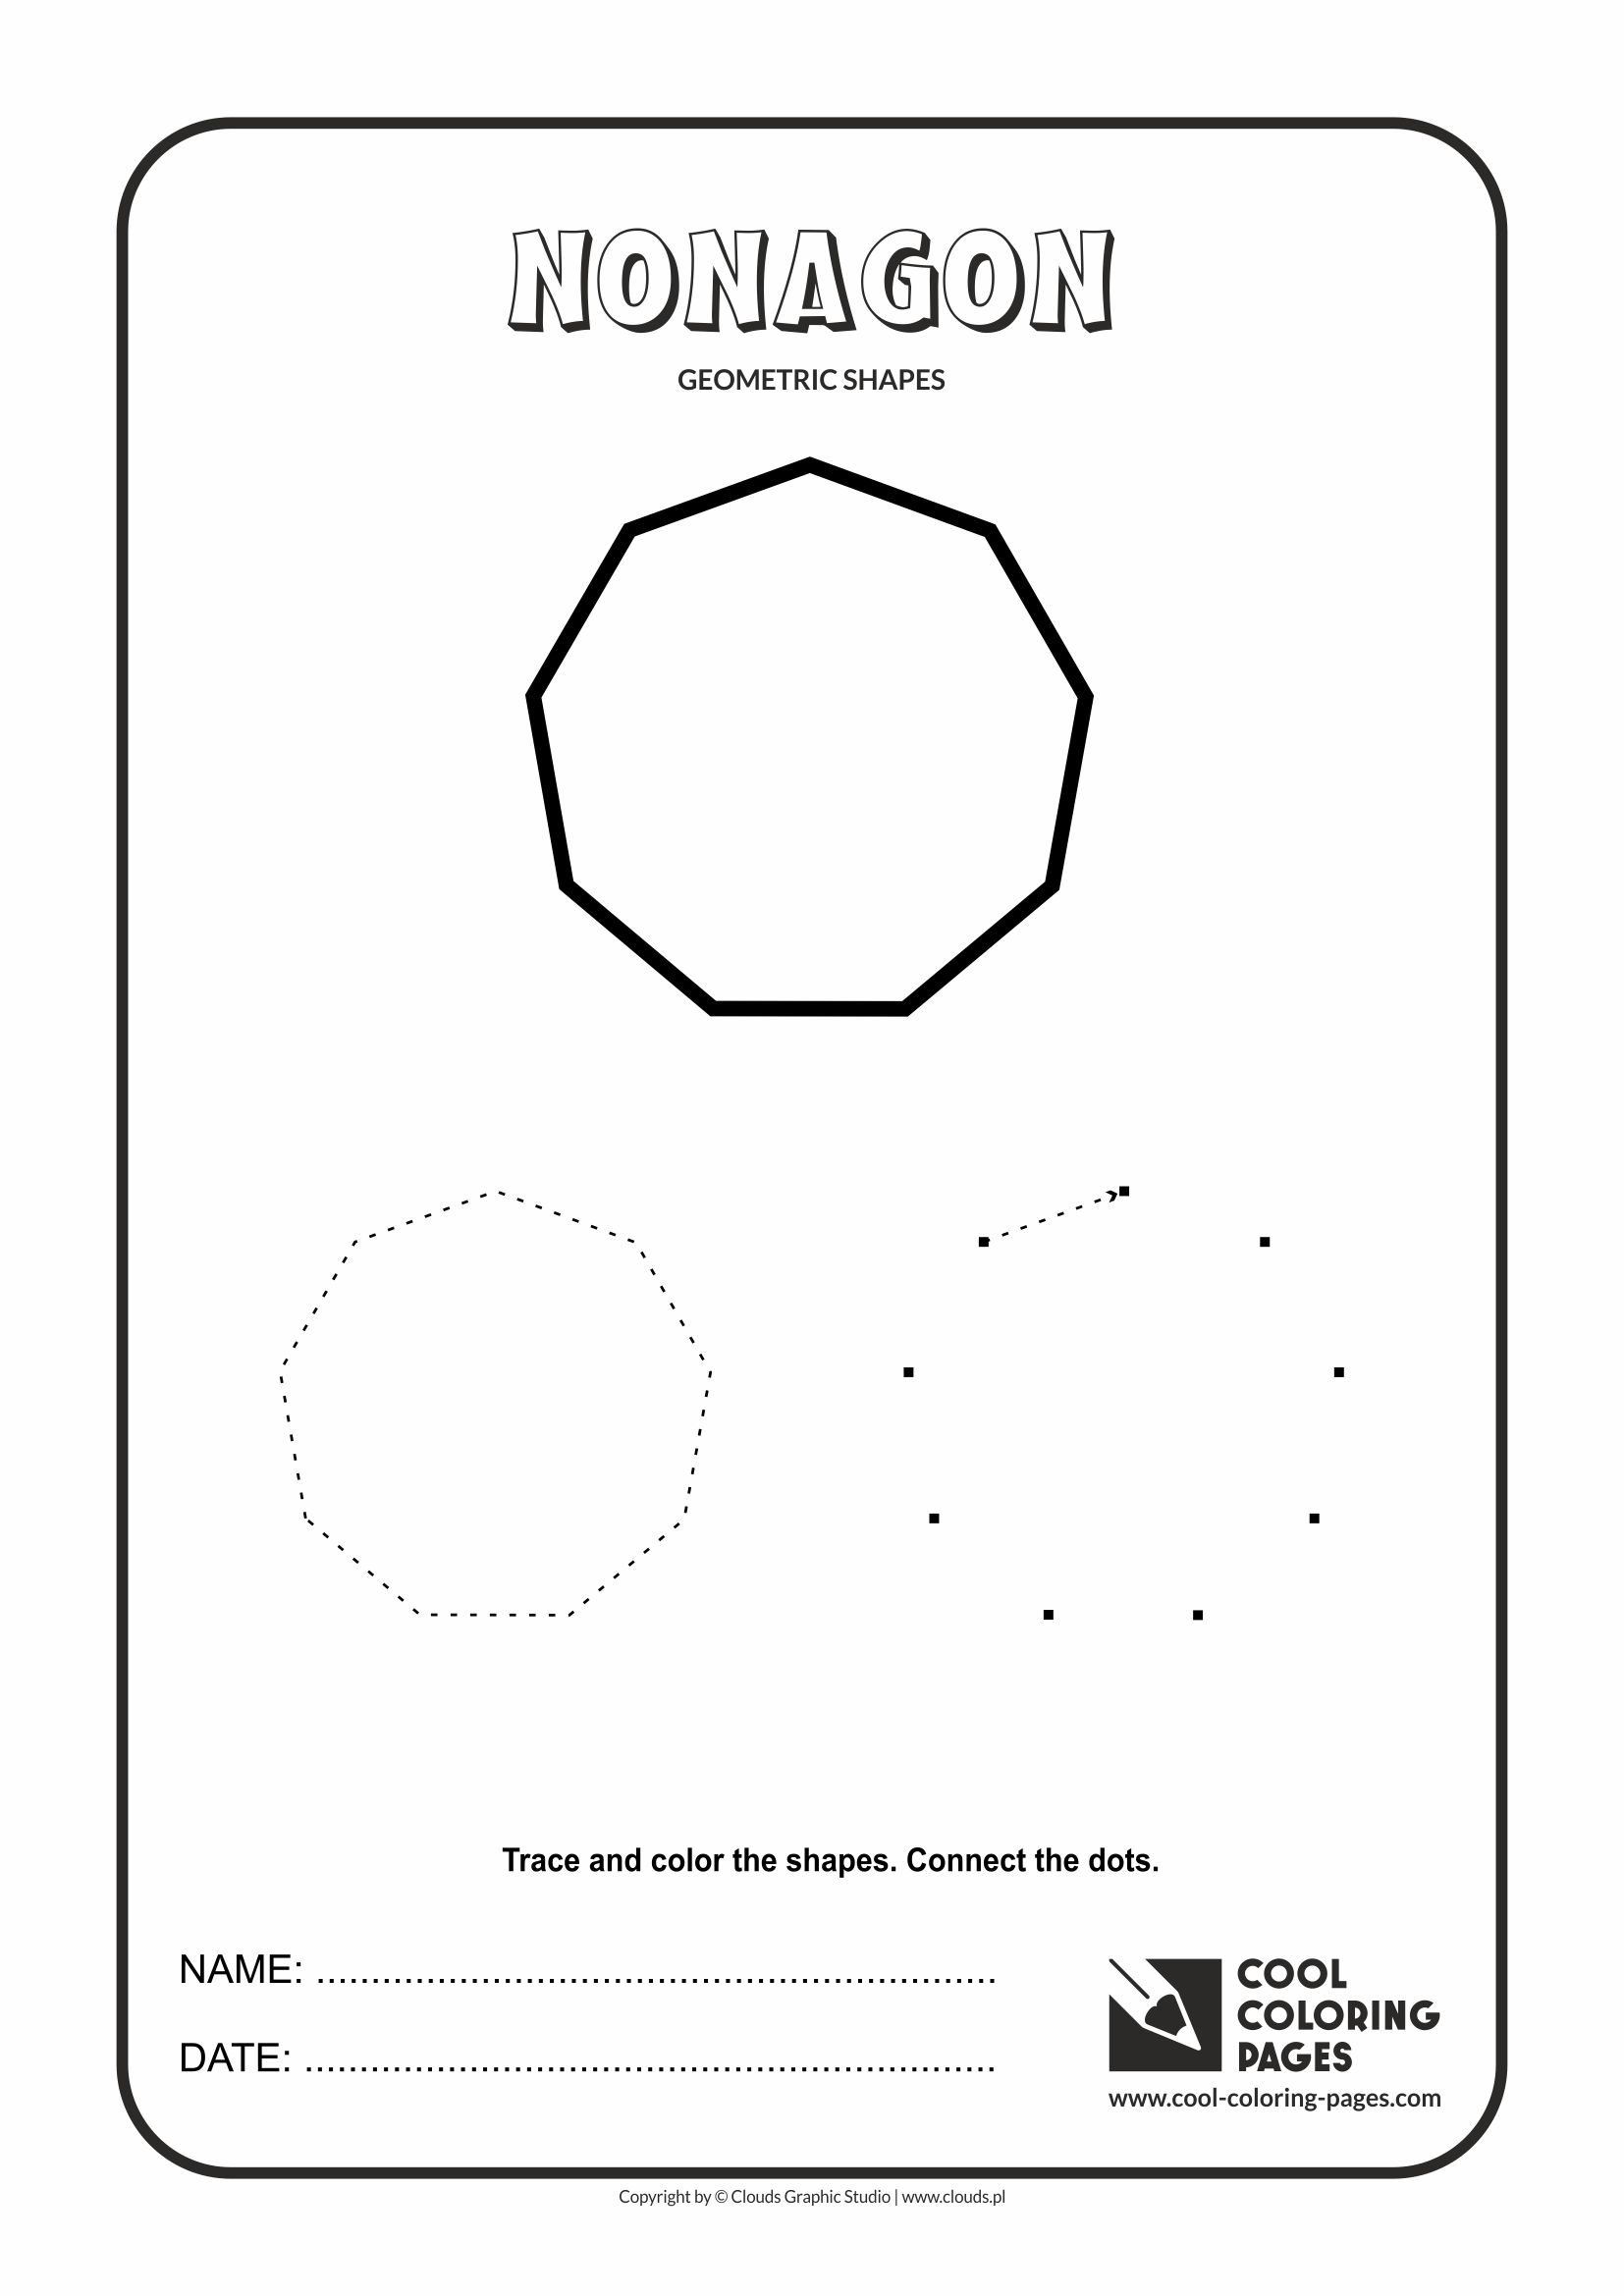 Cool Coloring Pages - Geometric shapes / Nonagon